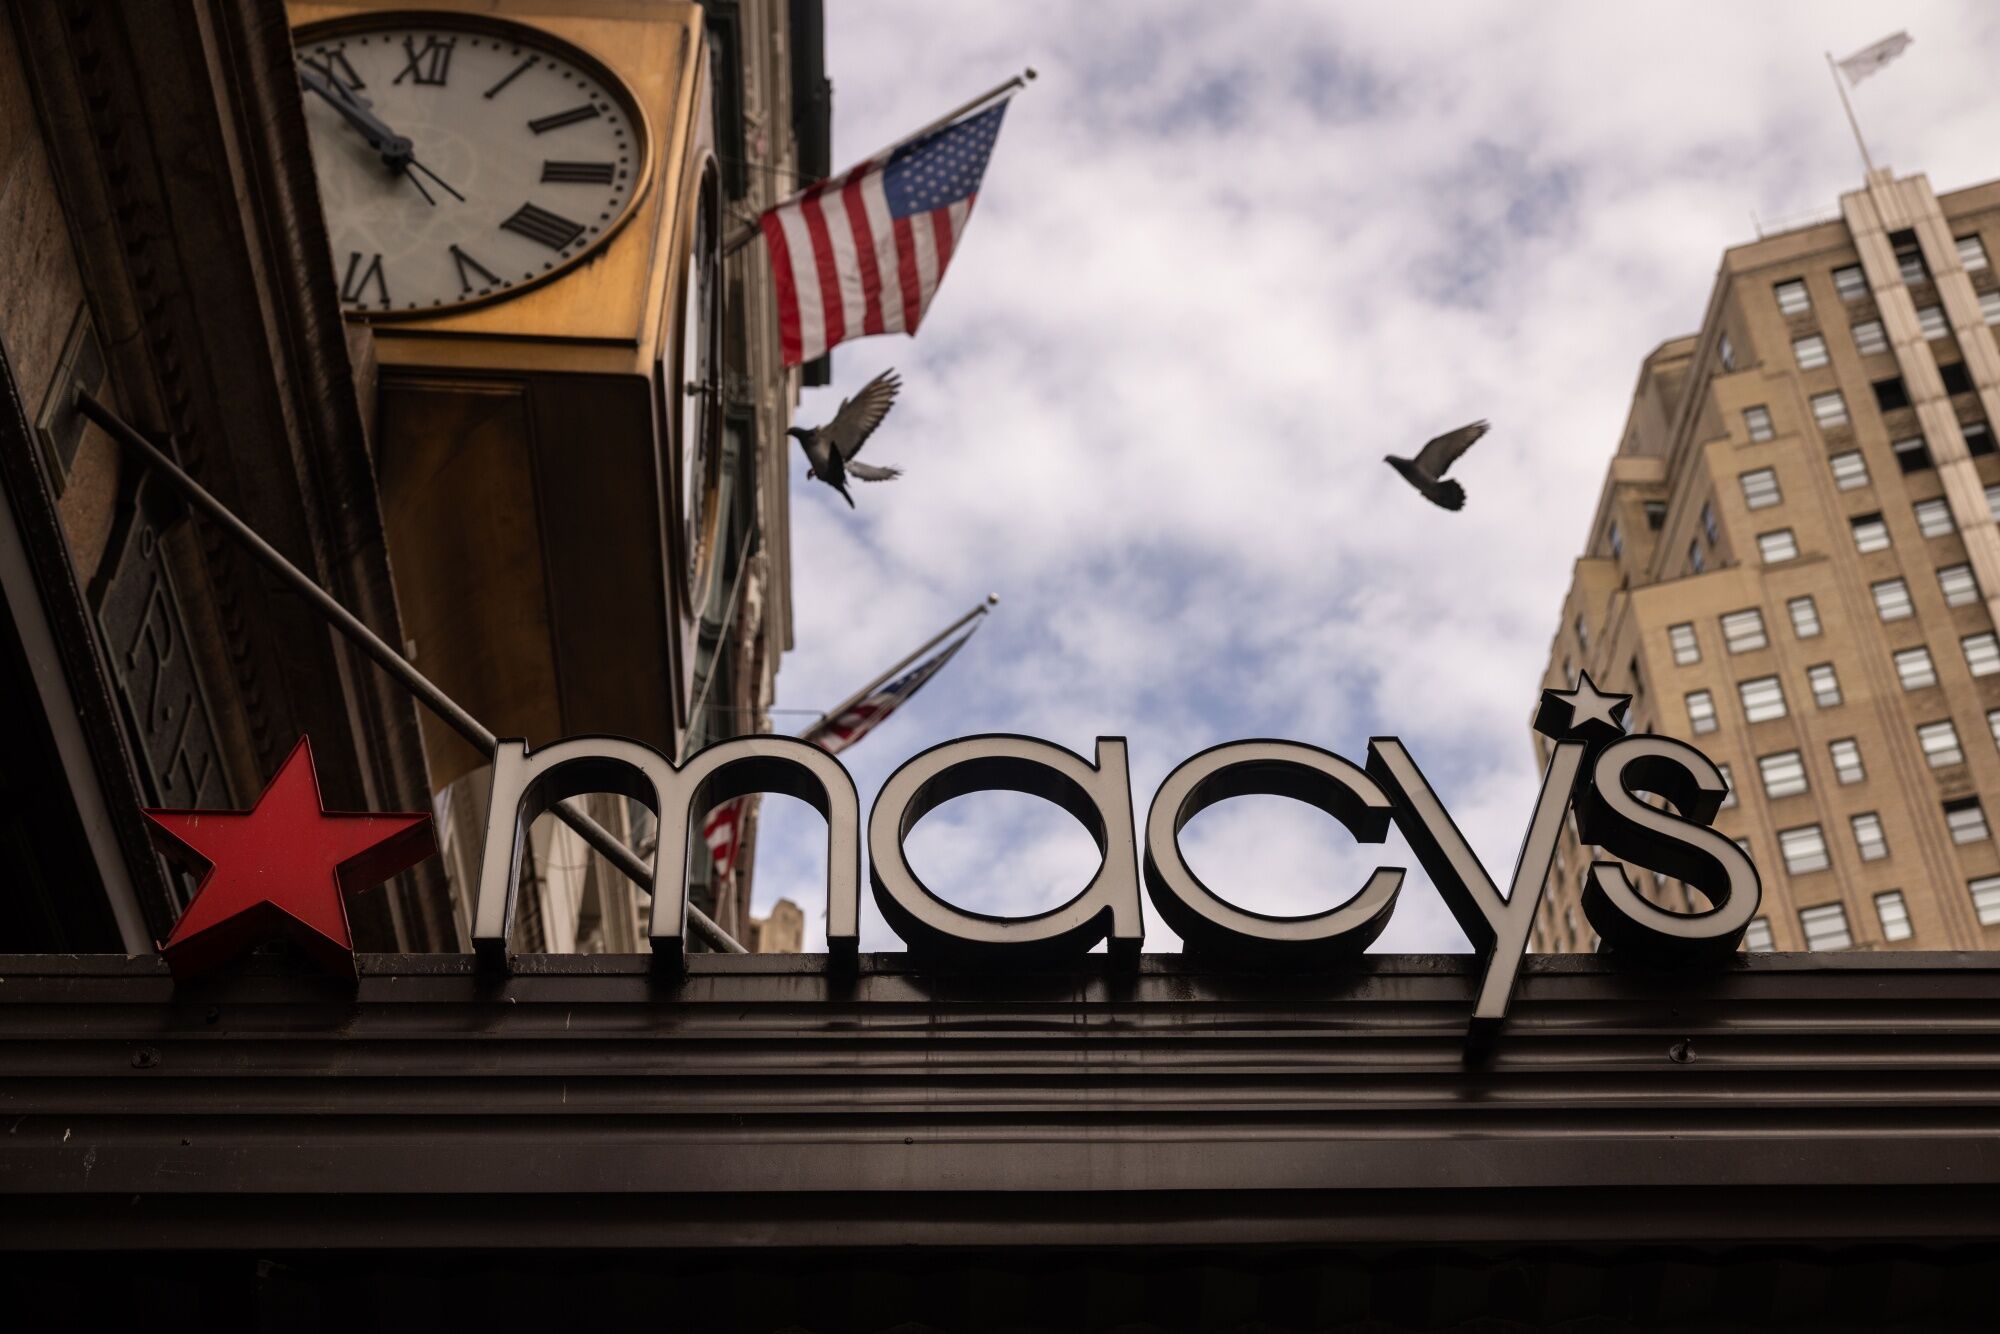 macy’s warns workers they may be fired if they don’t return to the office